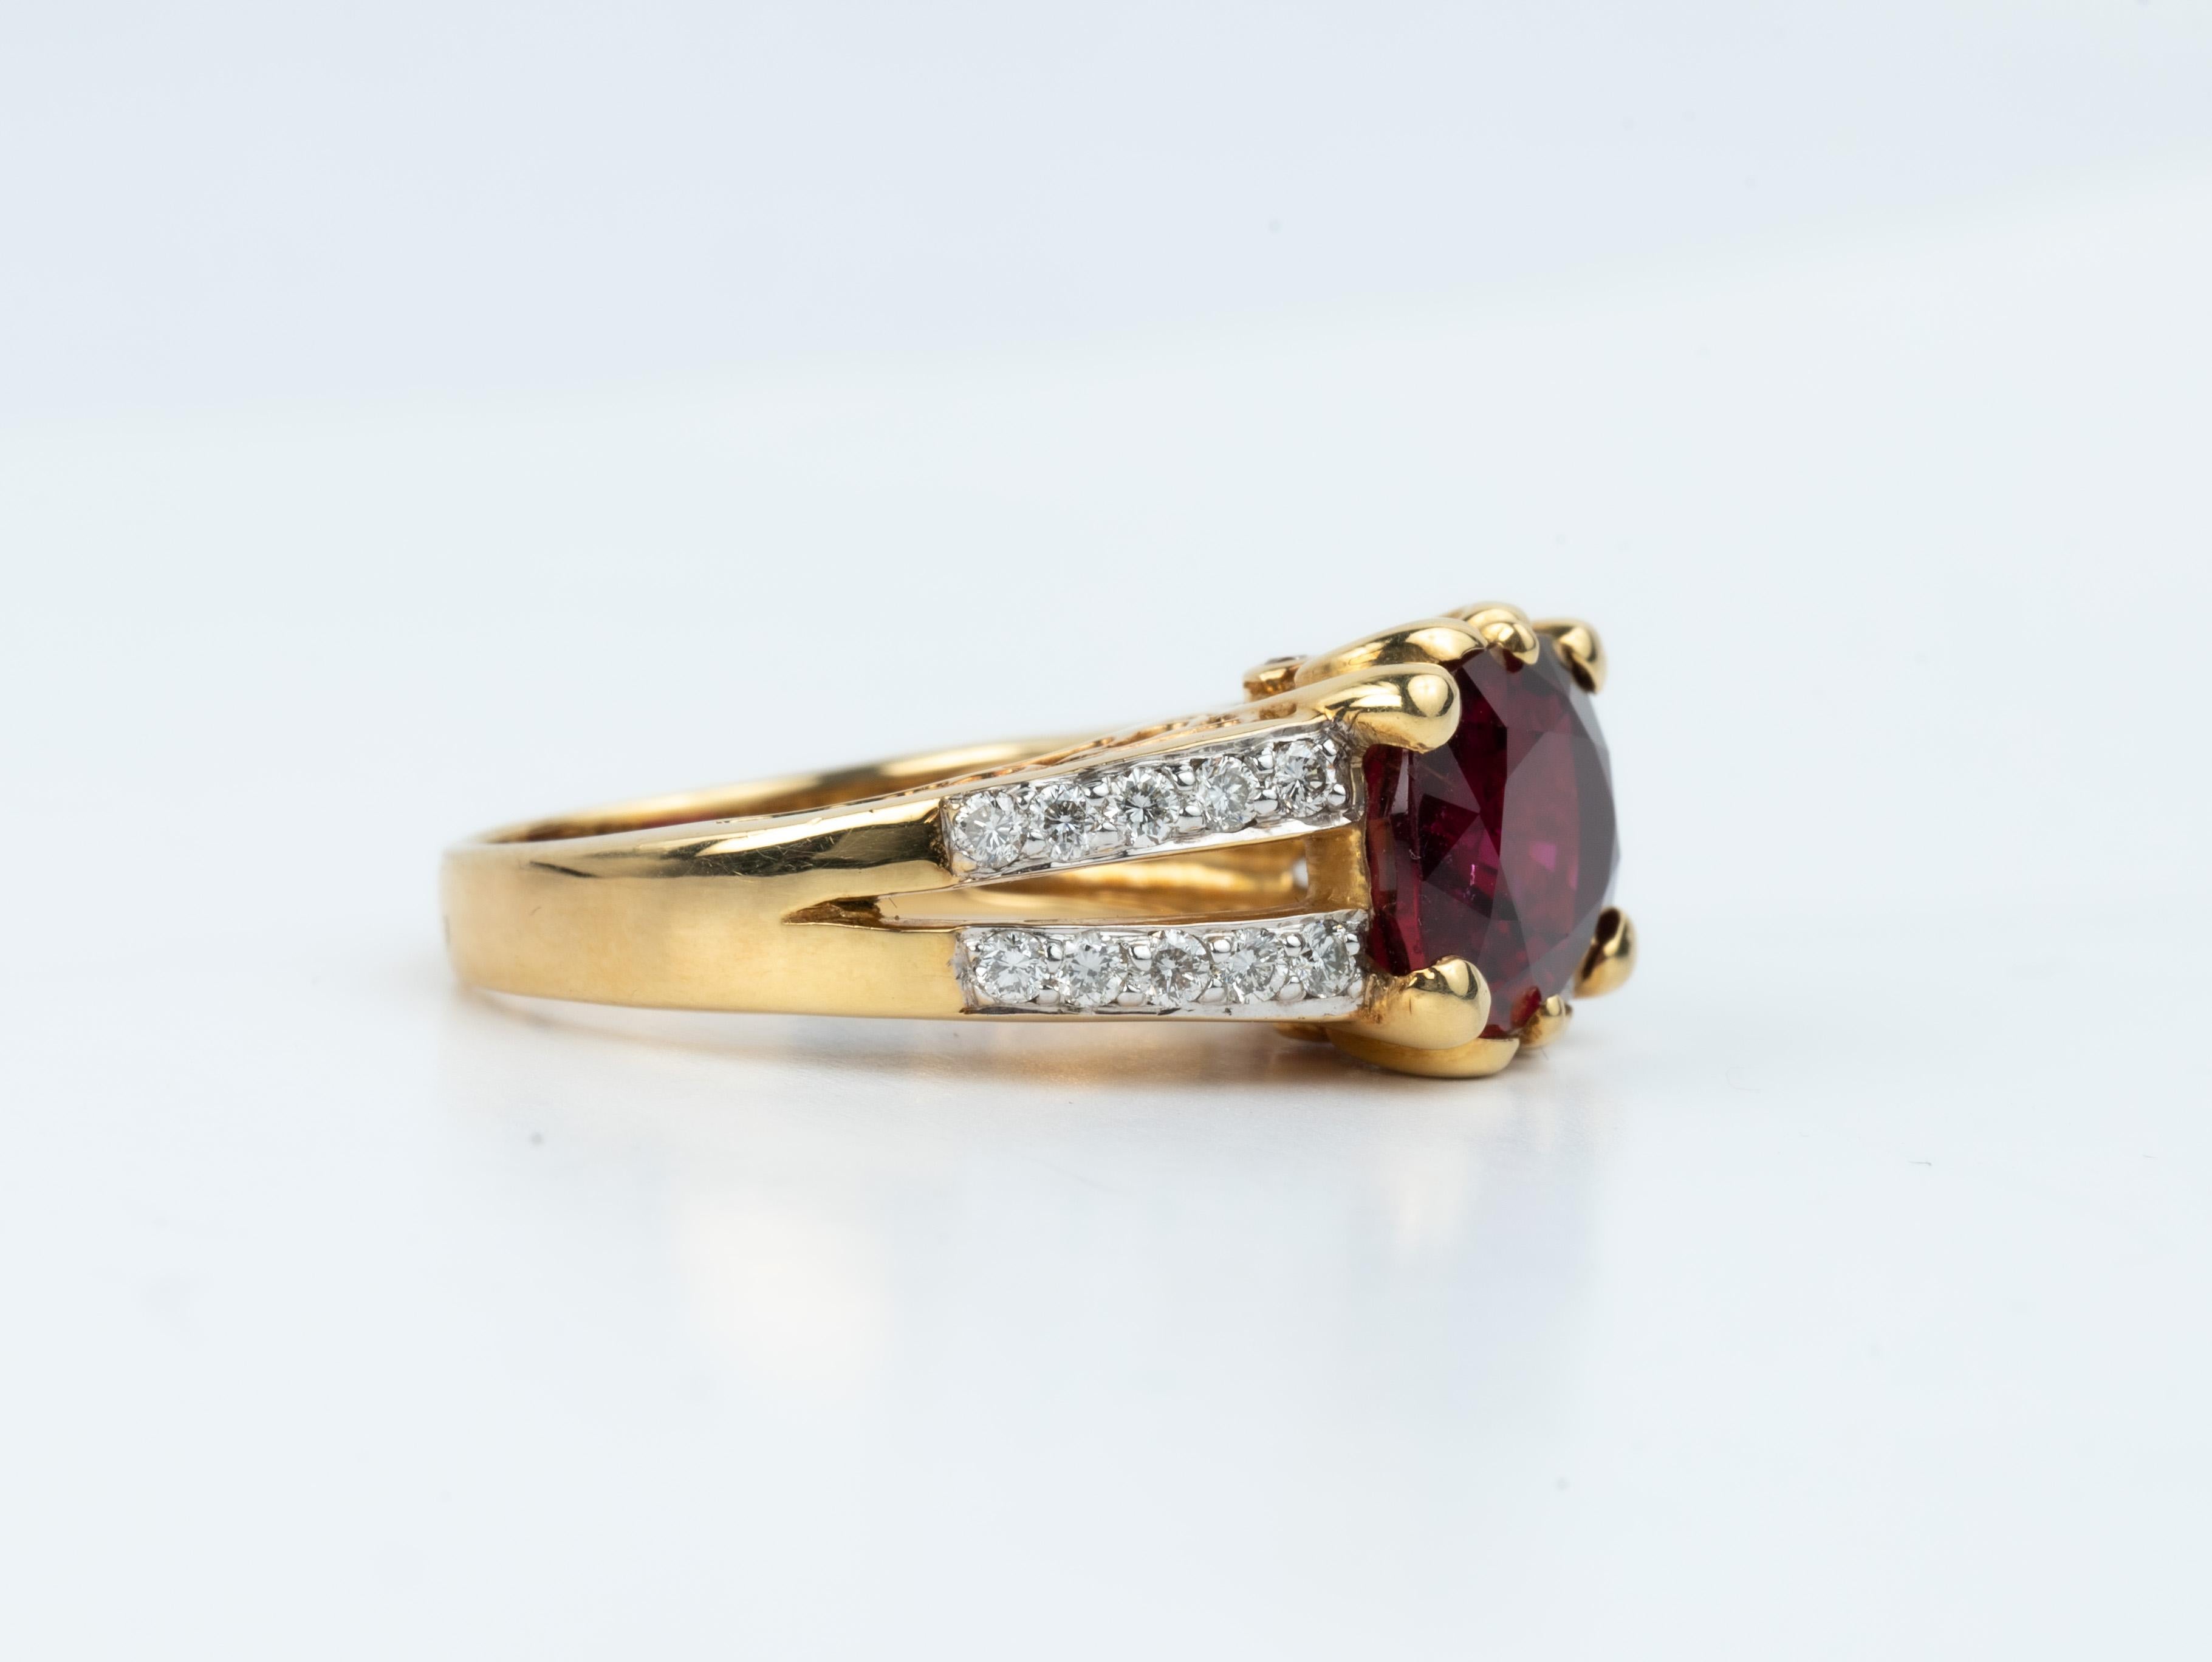 5 Carat Oval Cut Rubellite Tourmaline with 0.66 Diamonds Cocktail Ring 18k For Sale 2